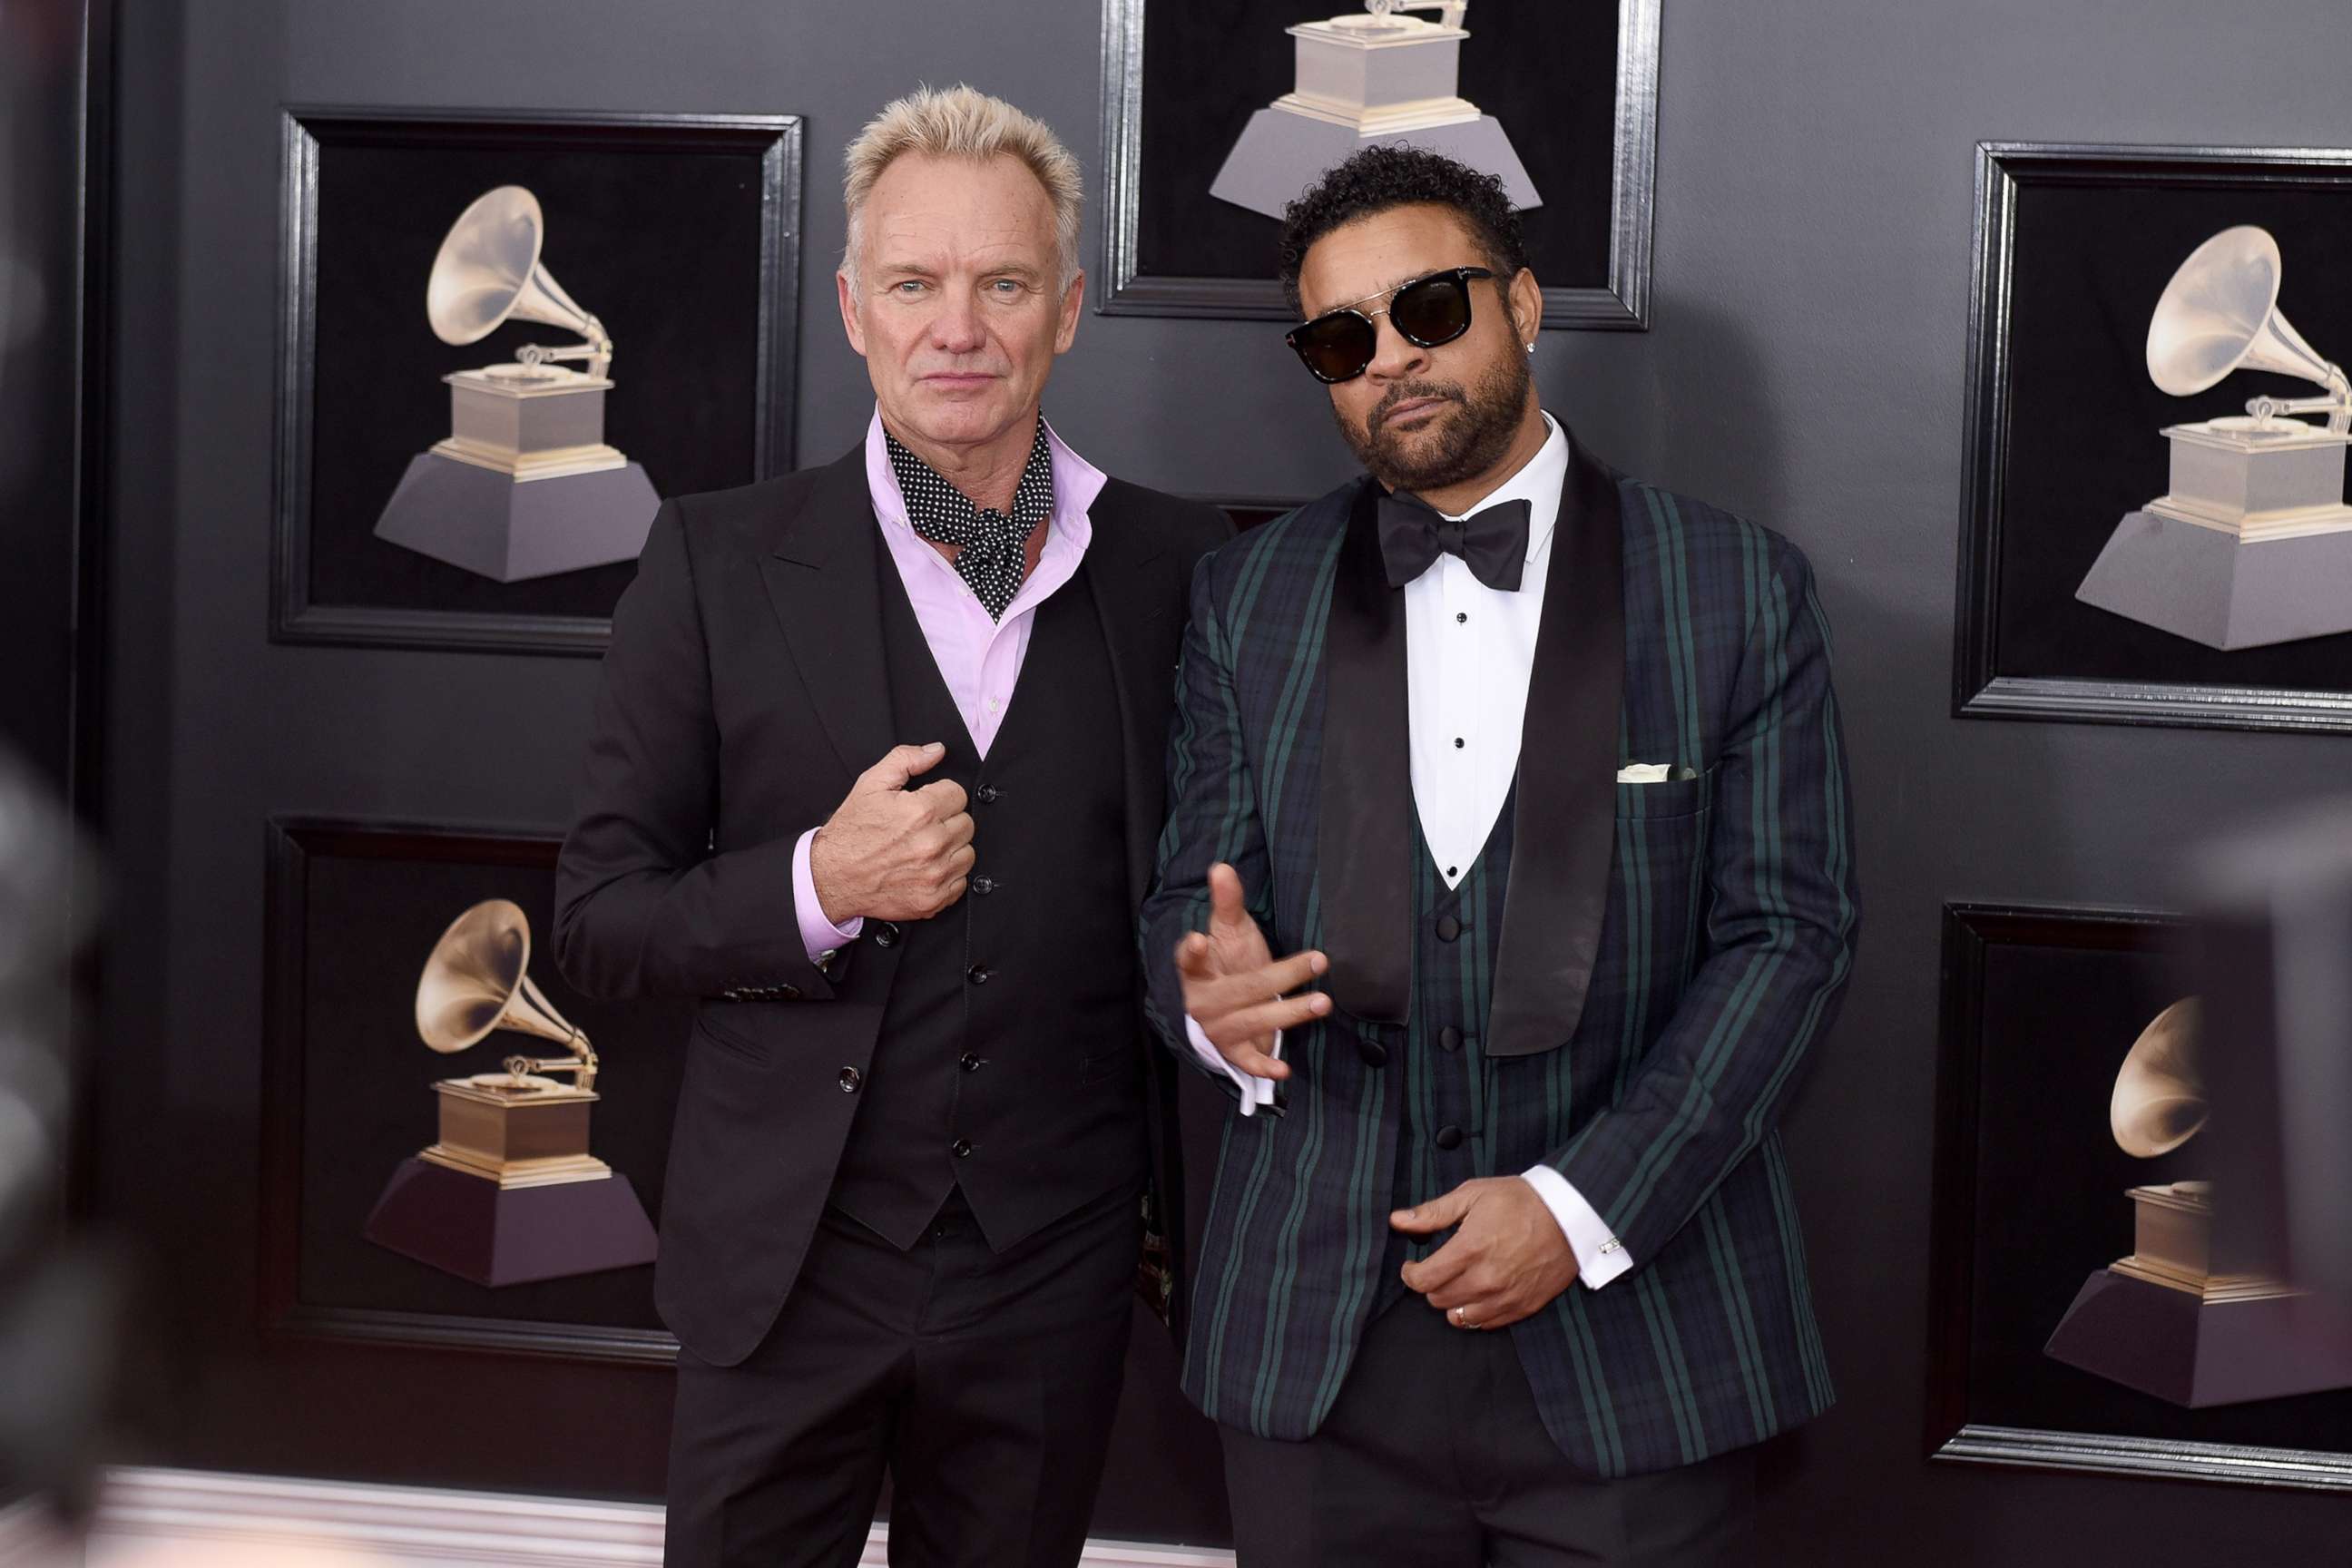 PHOTO: In this Jan. 28, 2018, file photo, Sting and Shaggy attend the 60th Annual GRAMMY Awards in New York.